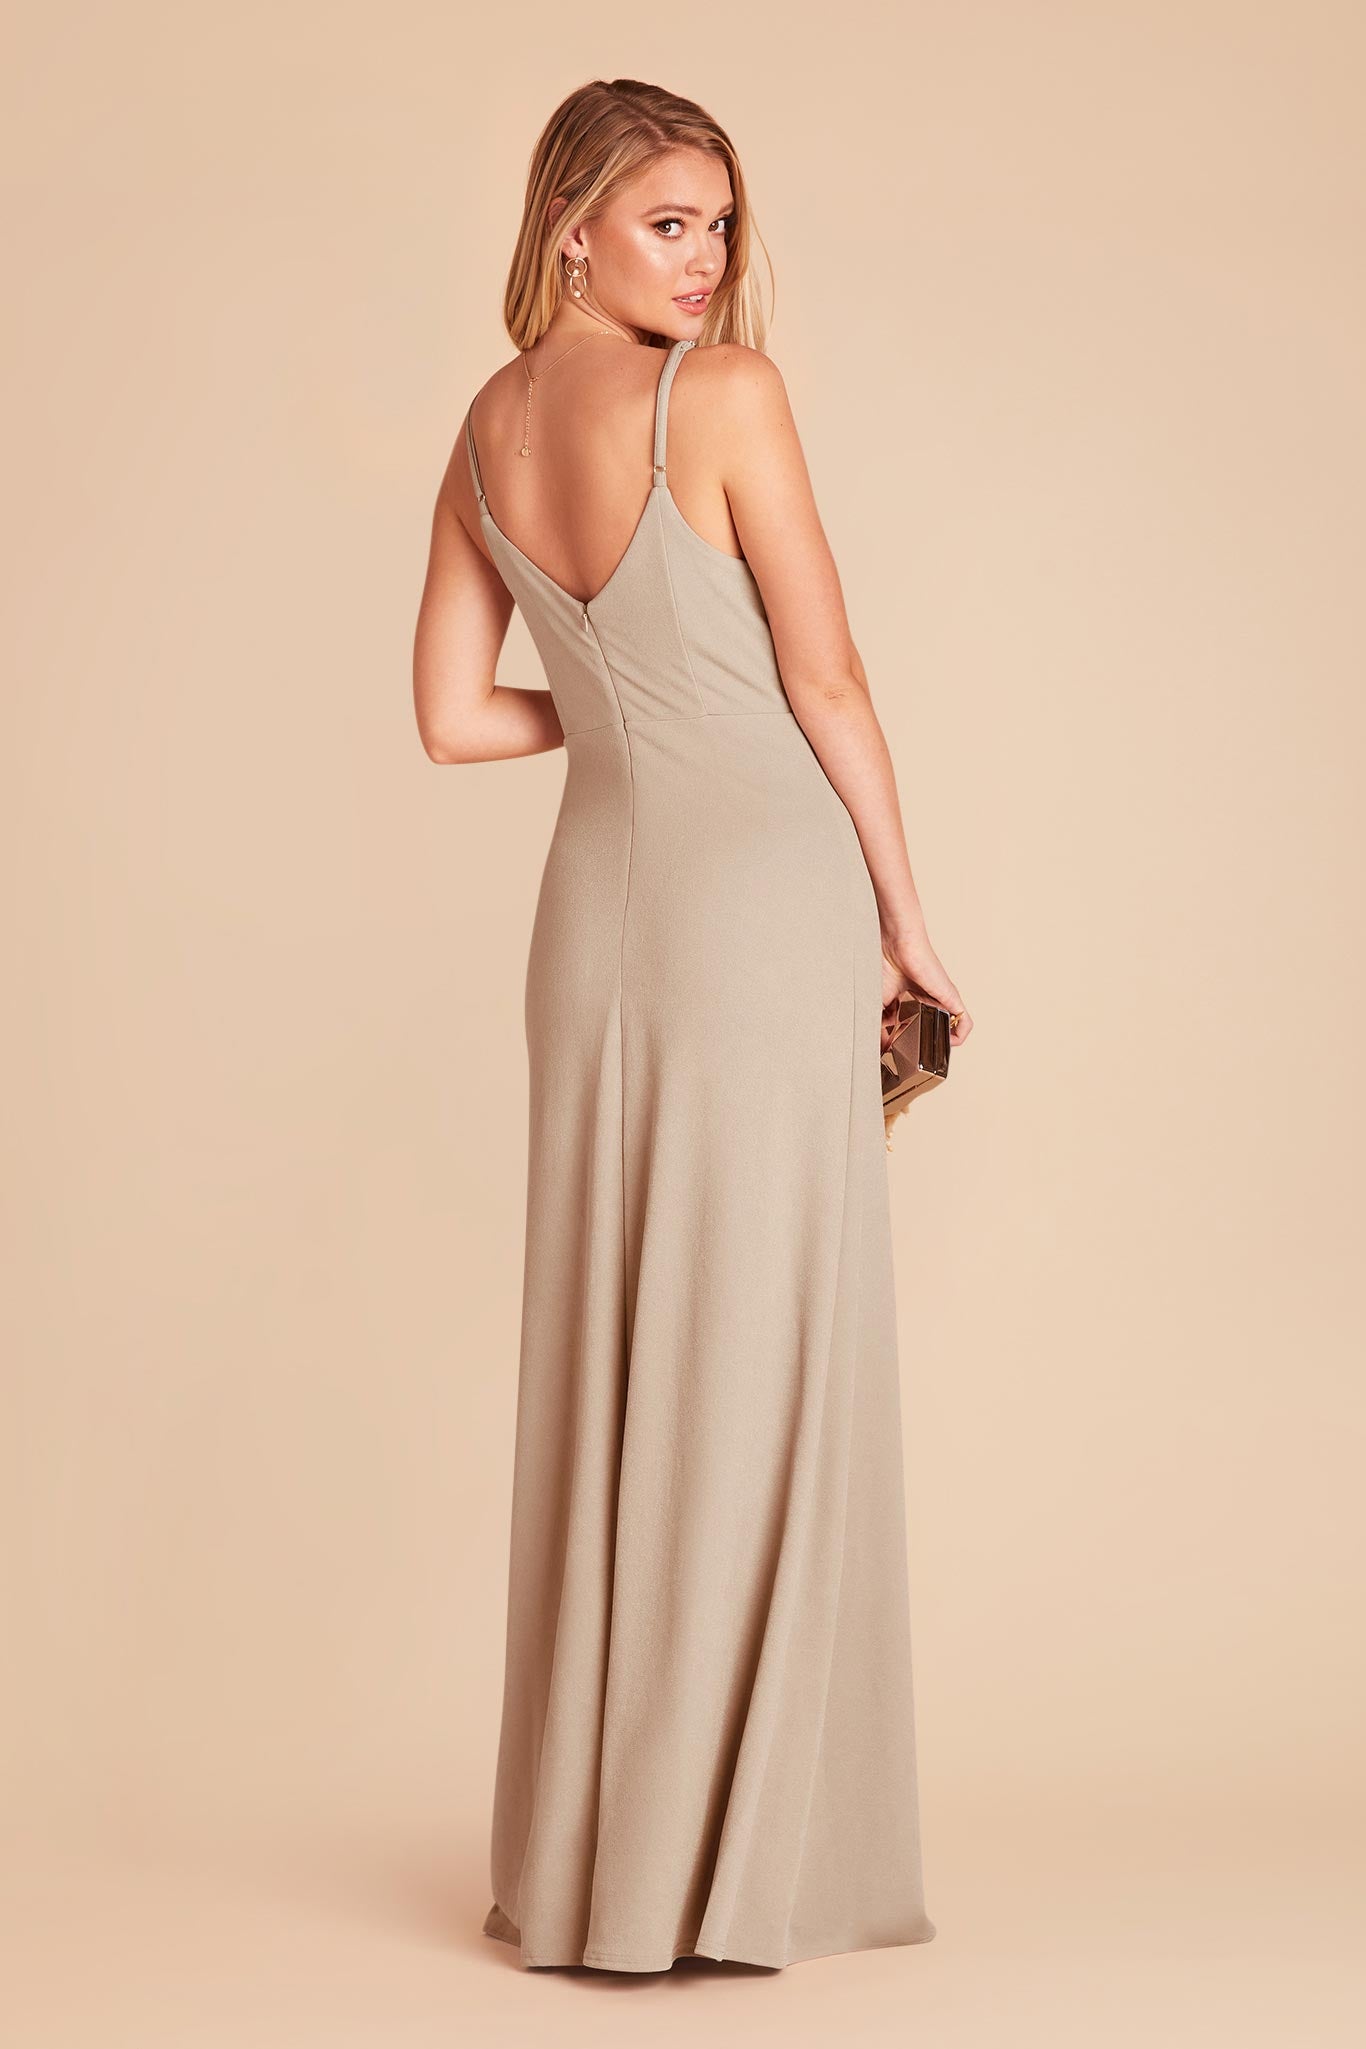 Almond Jay Convertible Crepe Dress by Birdy Grey